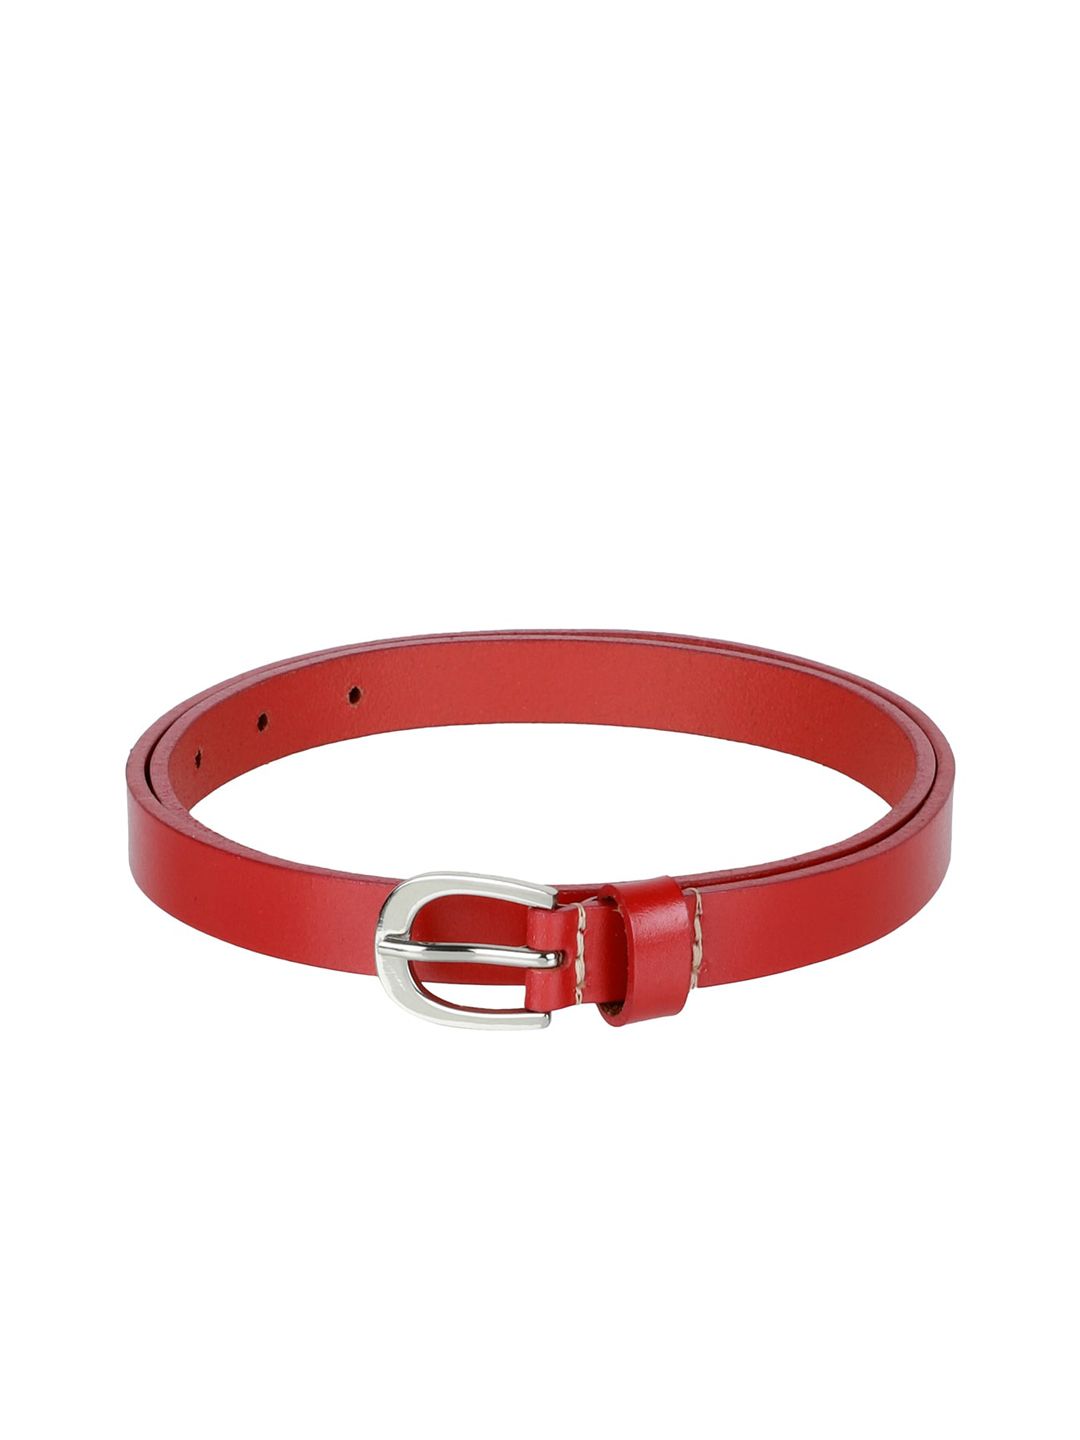 Aditi Wasan Women Red Genuine Leather Solid Belt Price in India